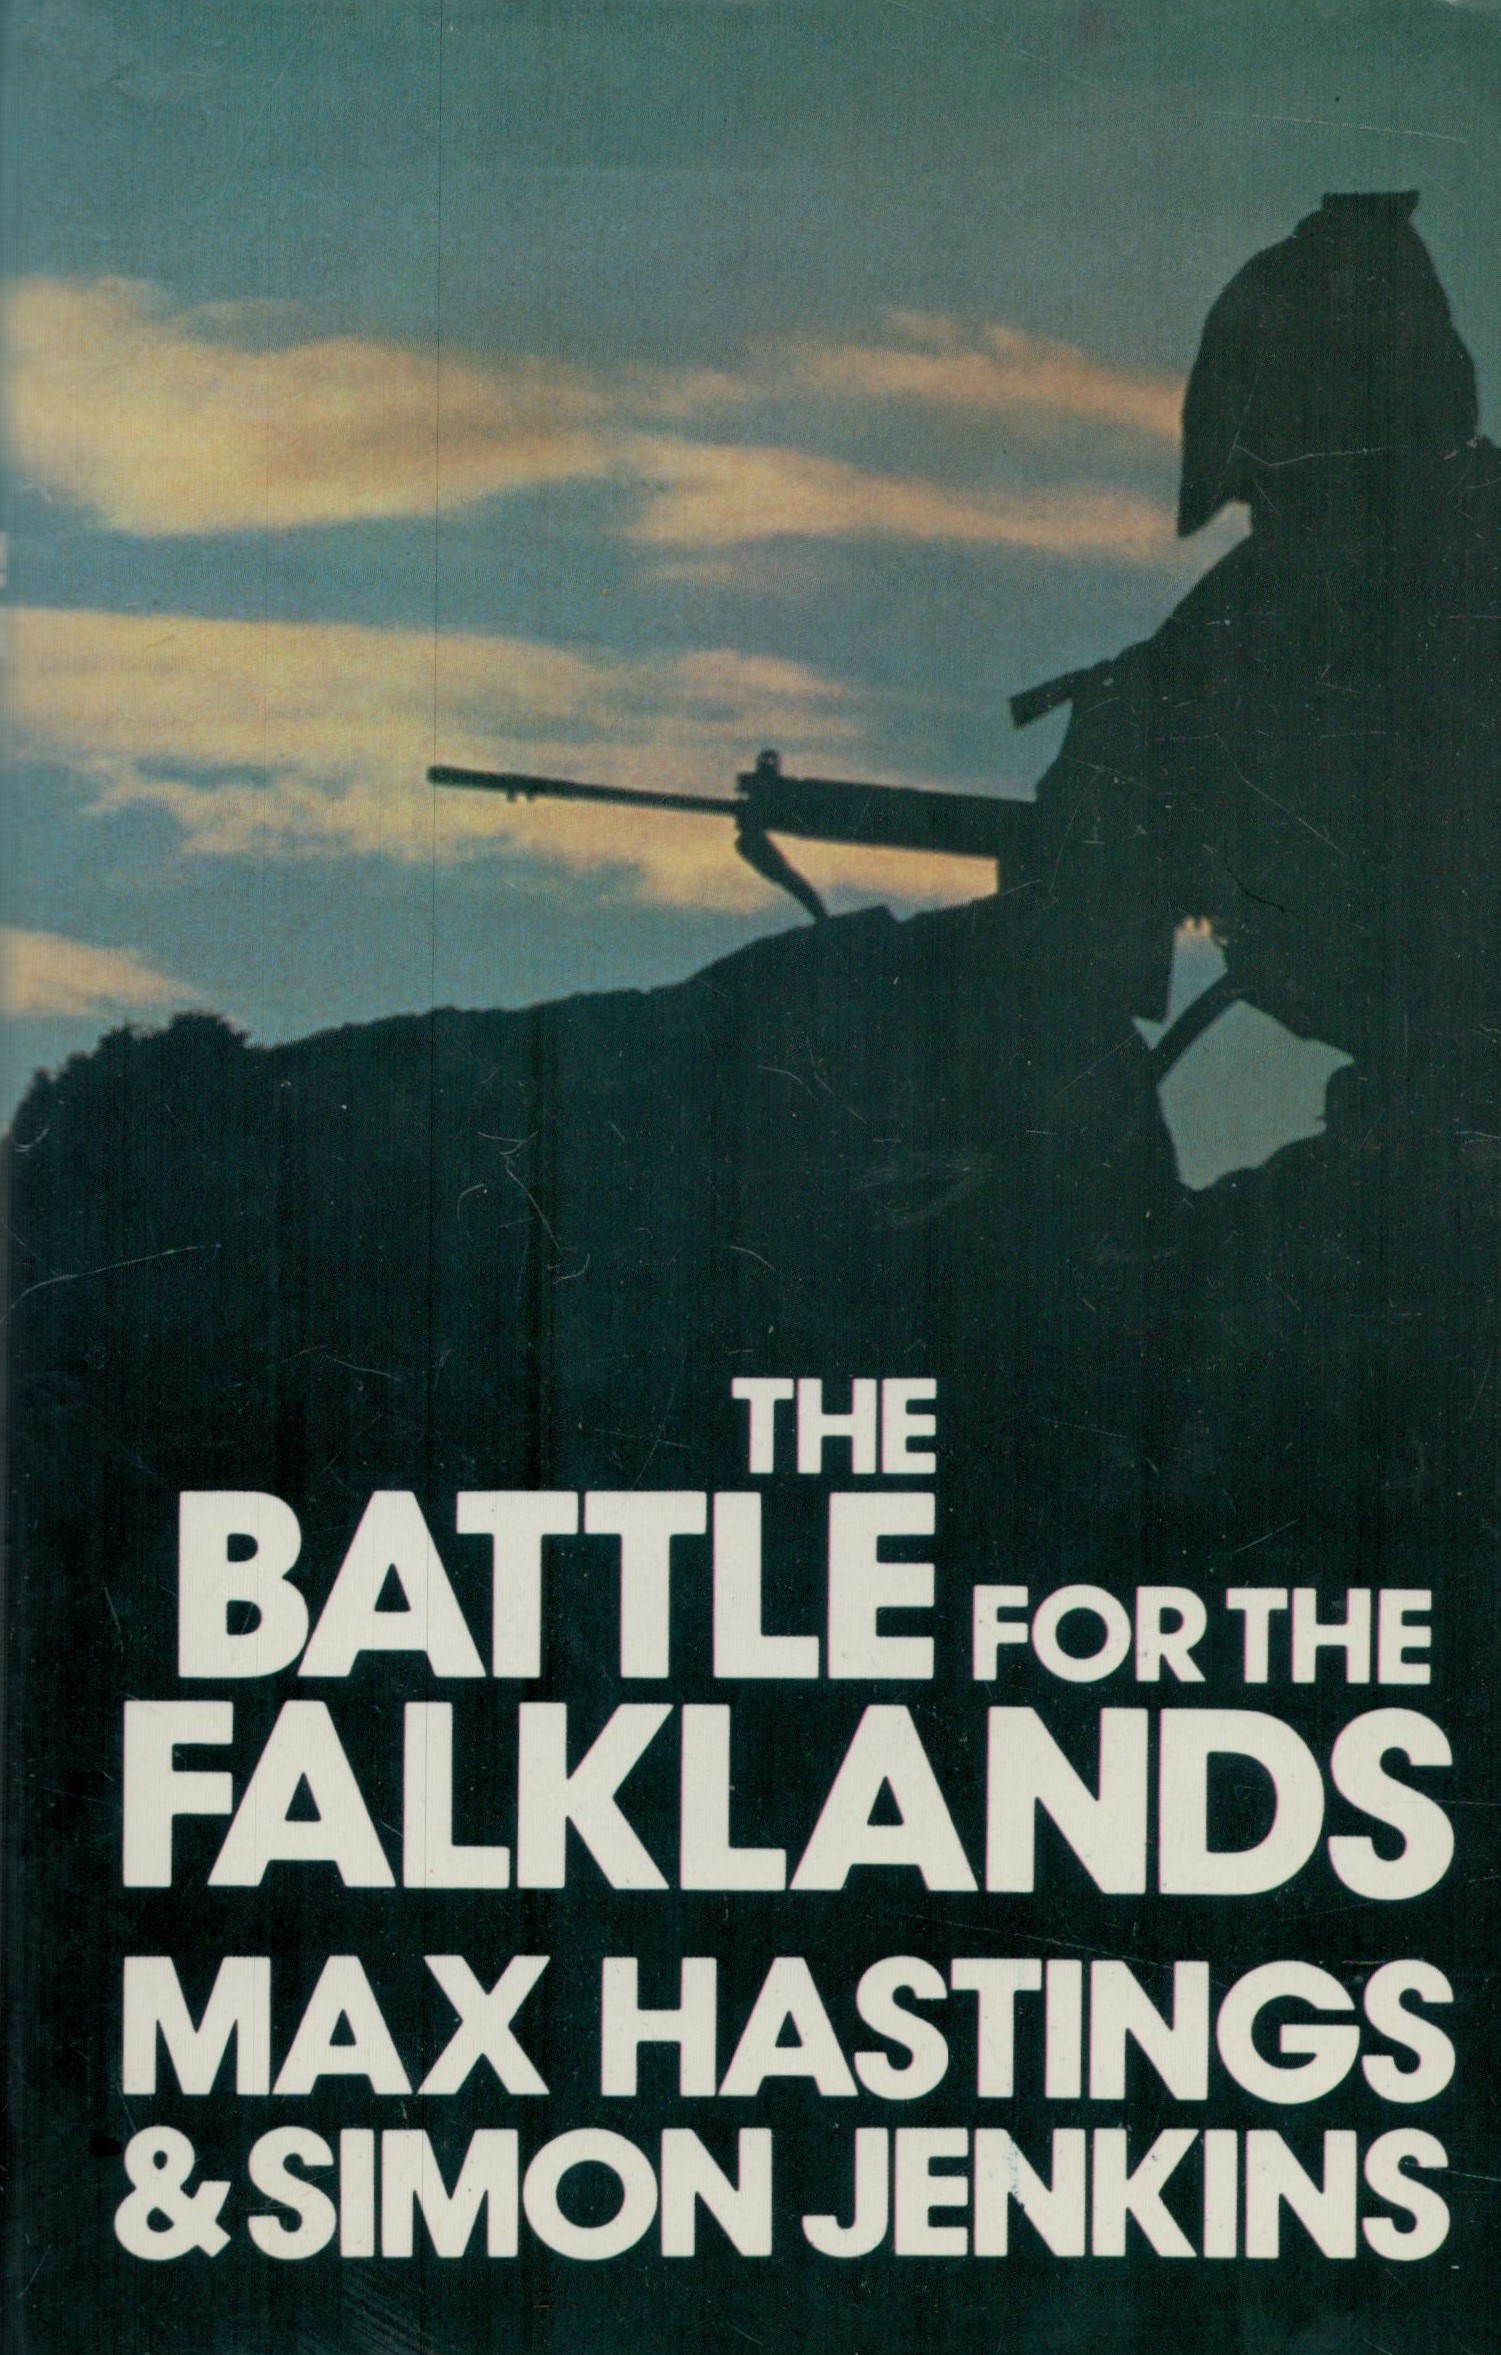 The Battle for the Falklands by Max Hastings & Simon Jenkins 1983 Book Club Edition Hardback Book - Image 2 of 9